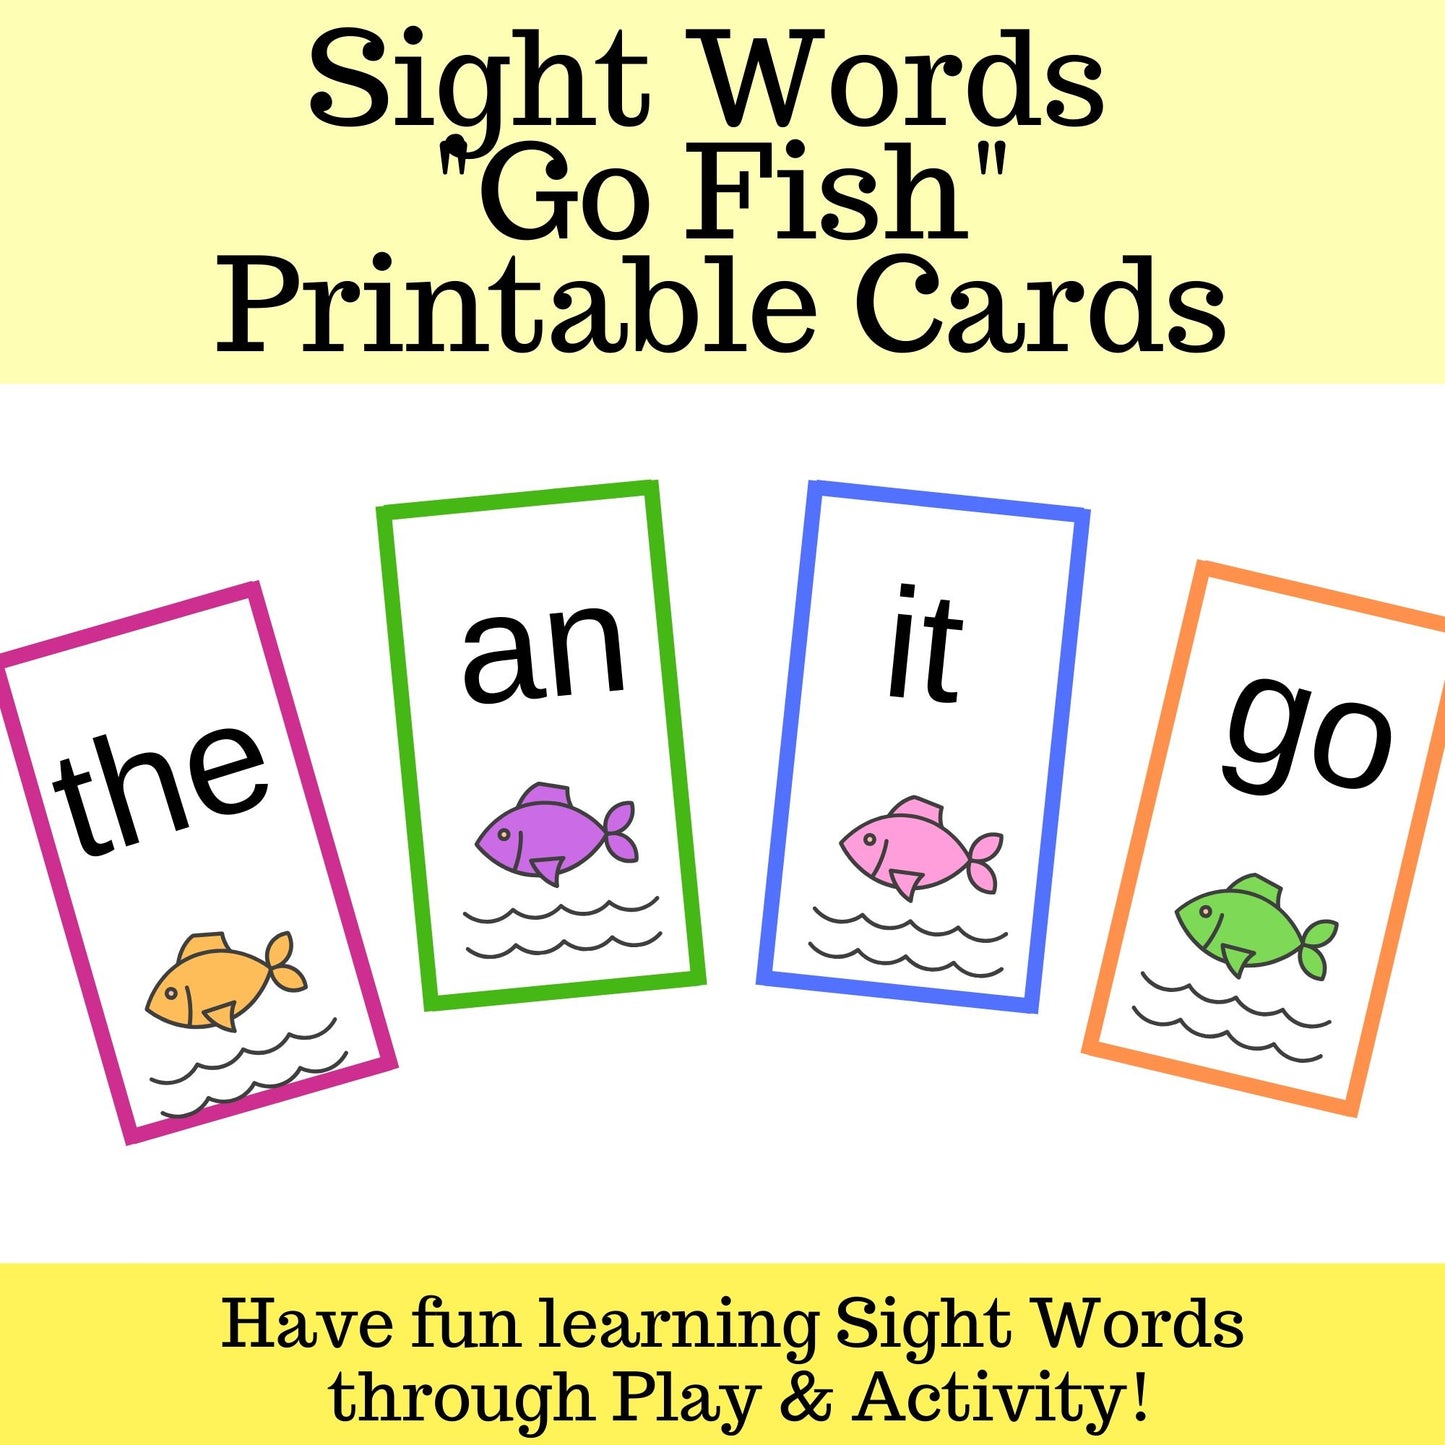 Sight Word "Go Fish" Game Cards